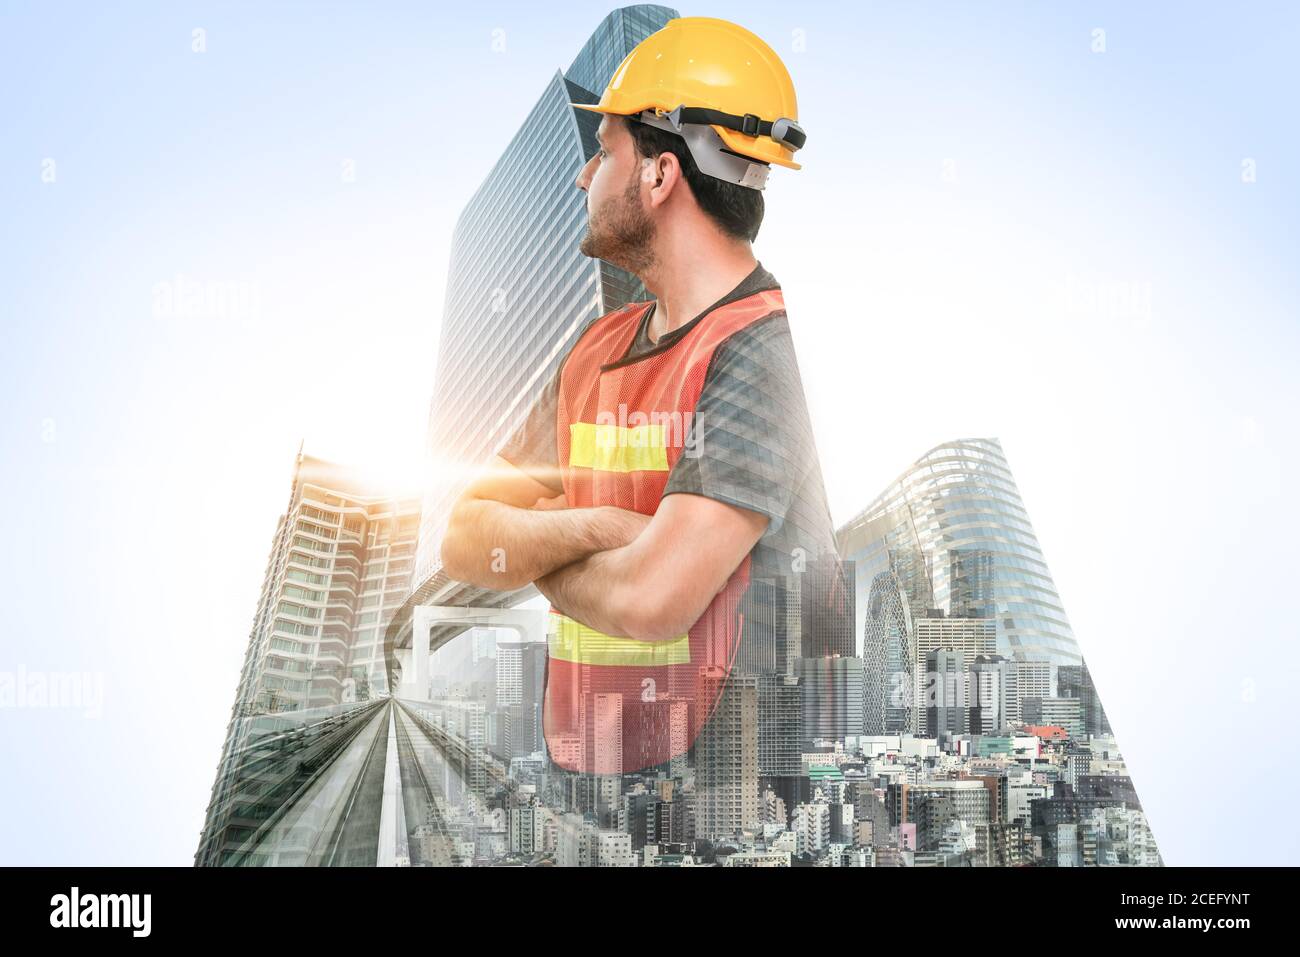 Future Building Construction Engineering Project Stock Photo